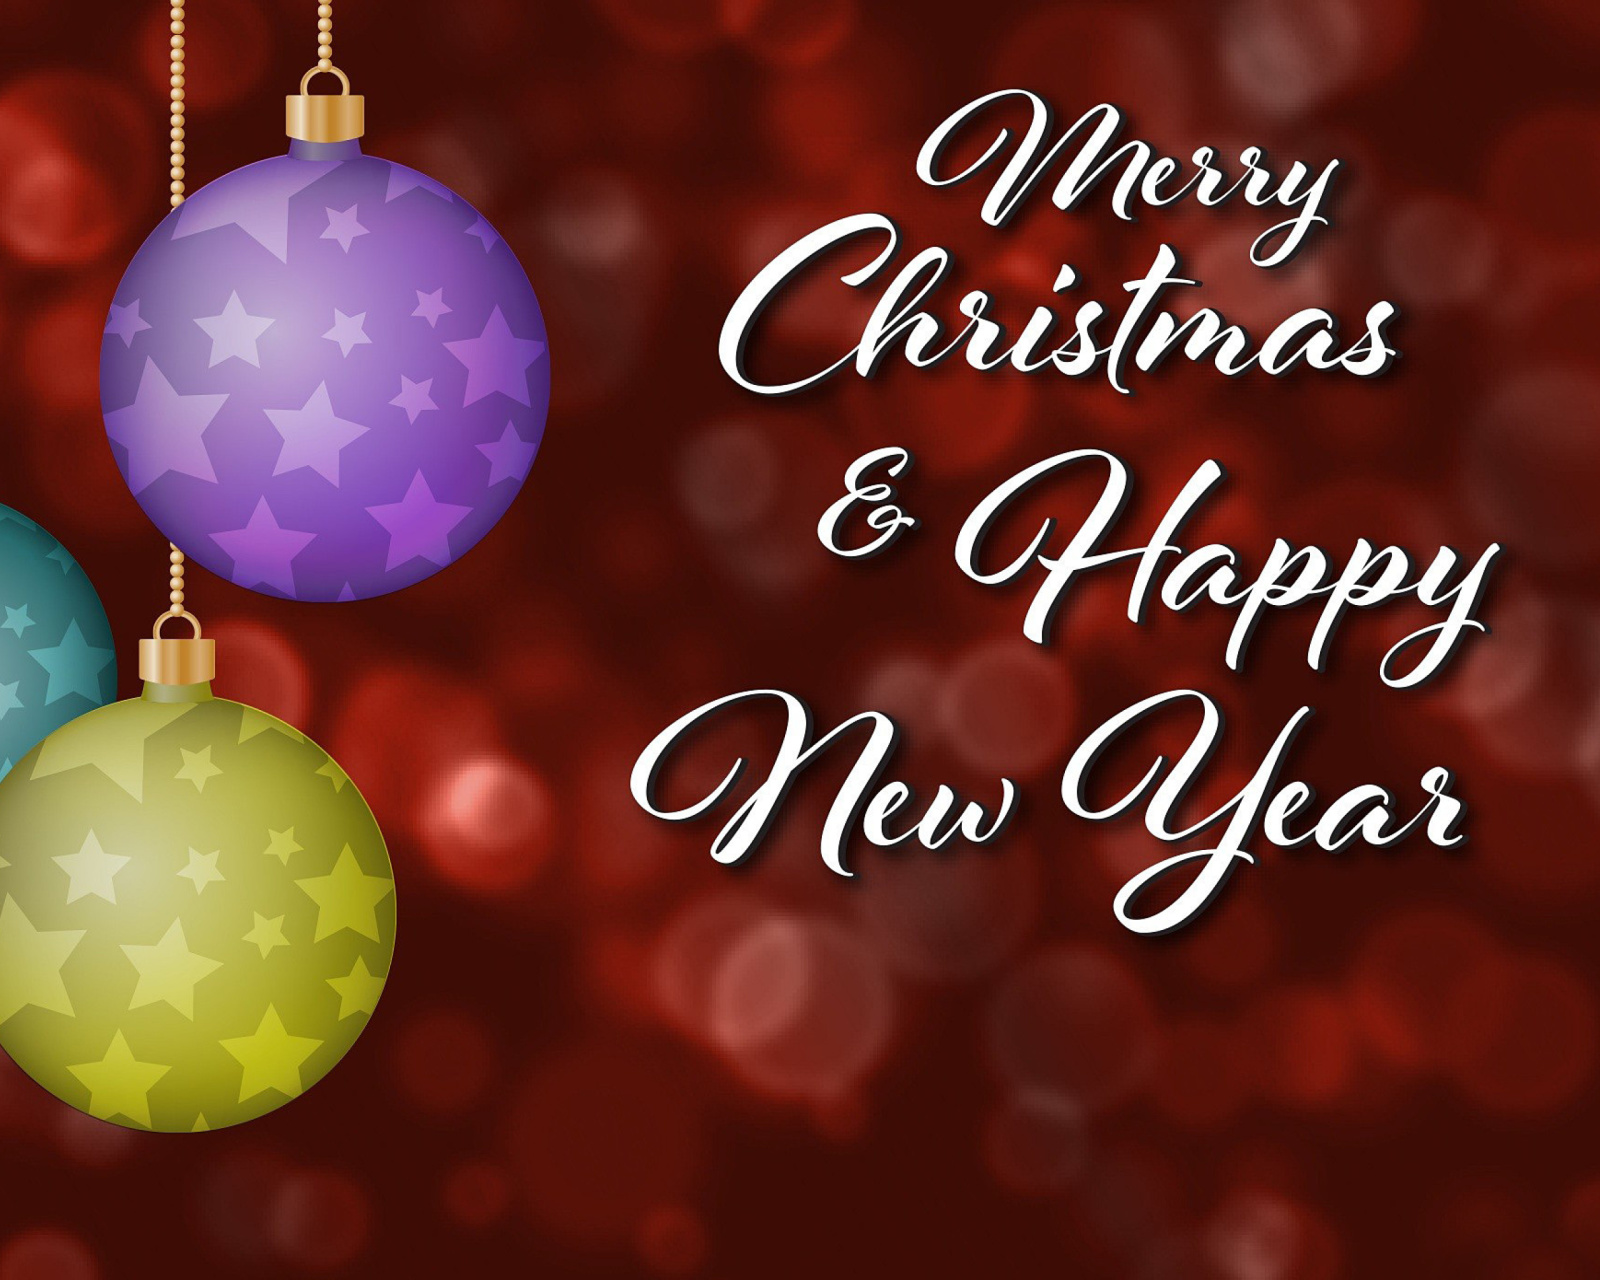 Merry Christmas and Best Wishes for a Happy New Year wallpaper 1600x1280